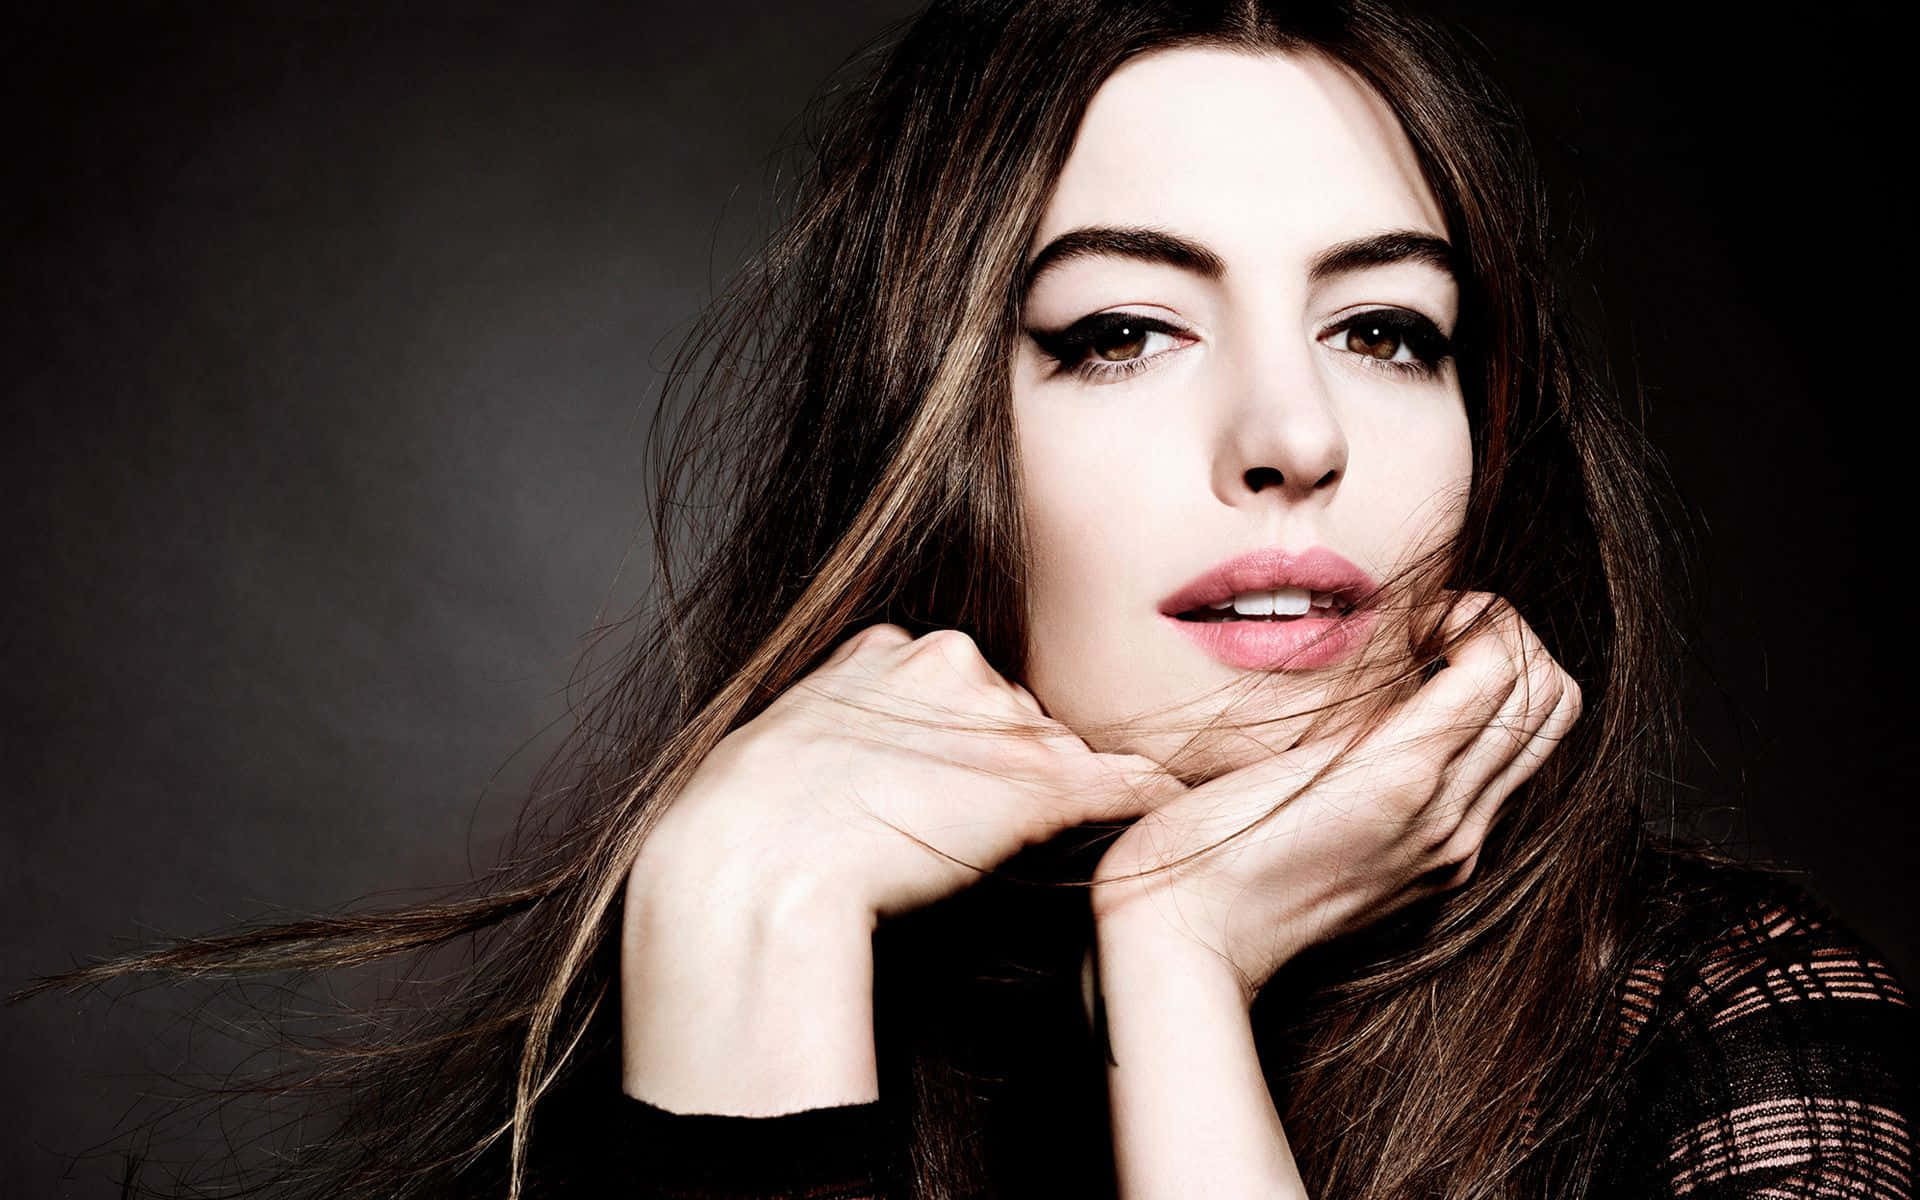 Anne Hathaway radiates beauty and style